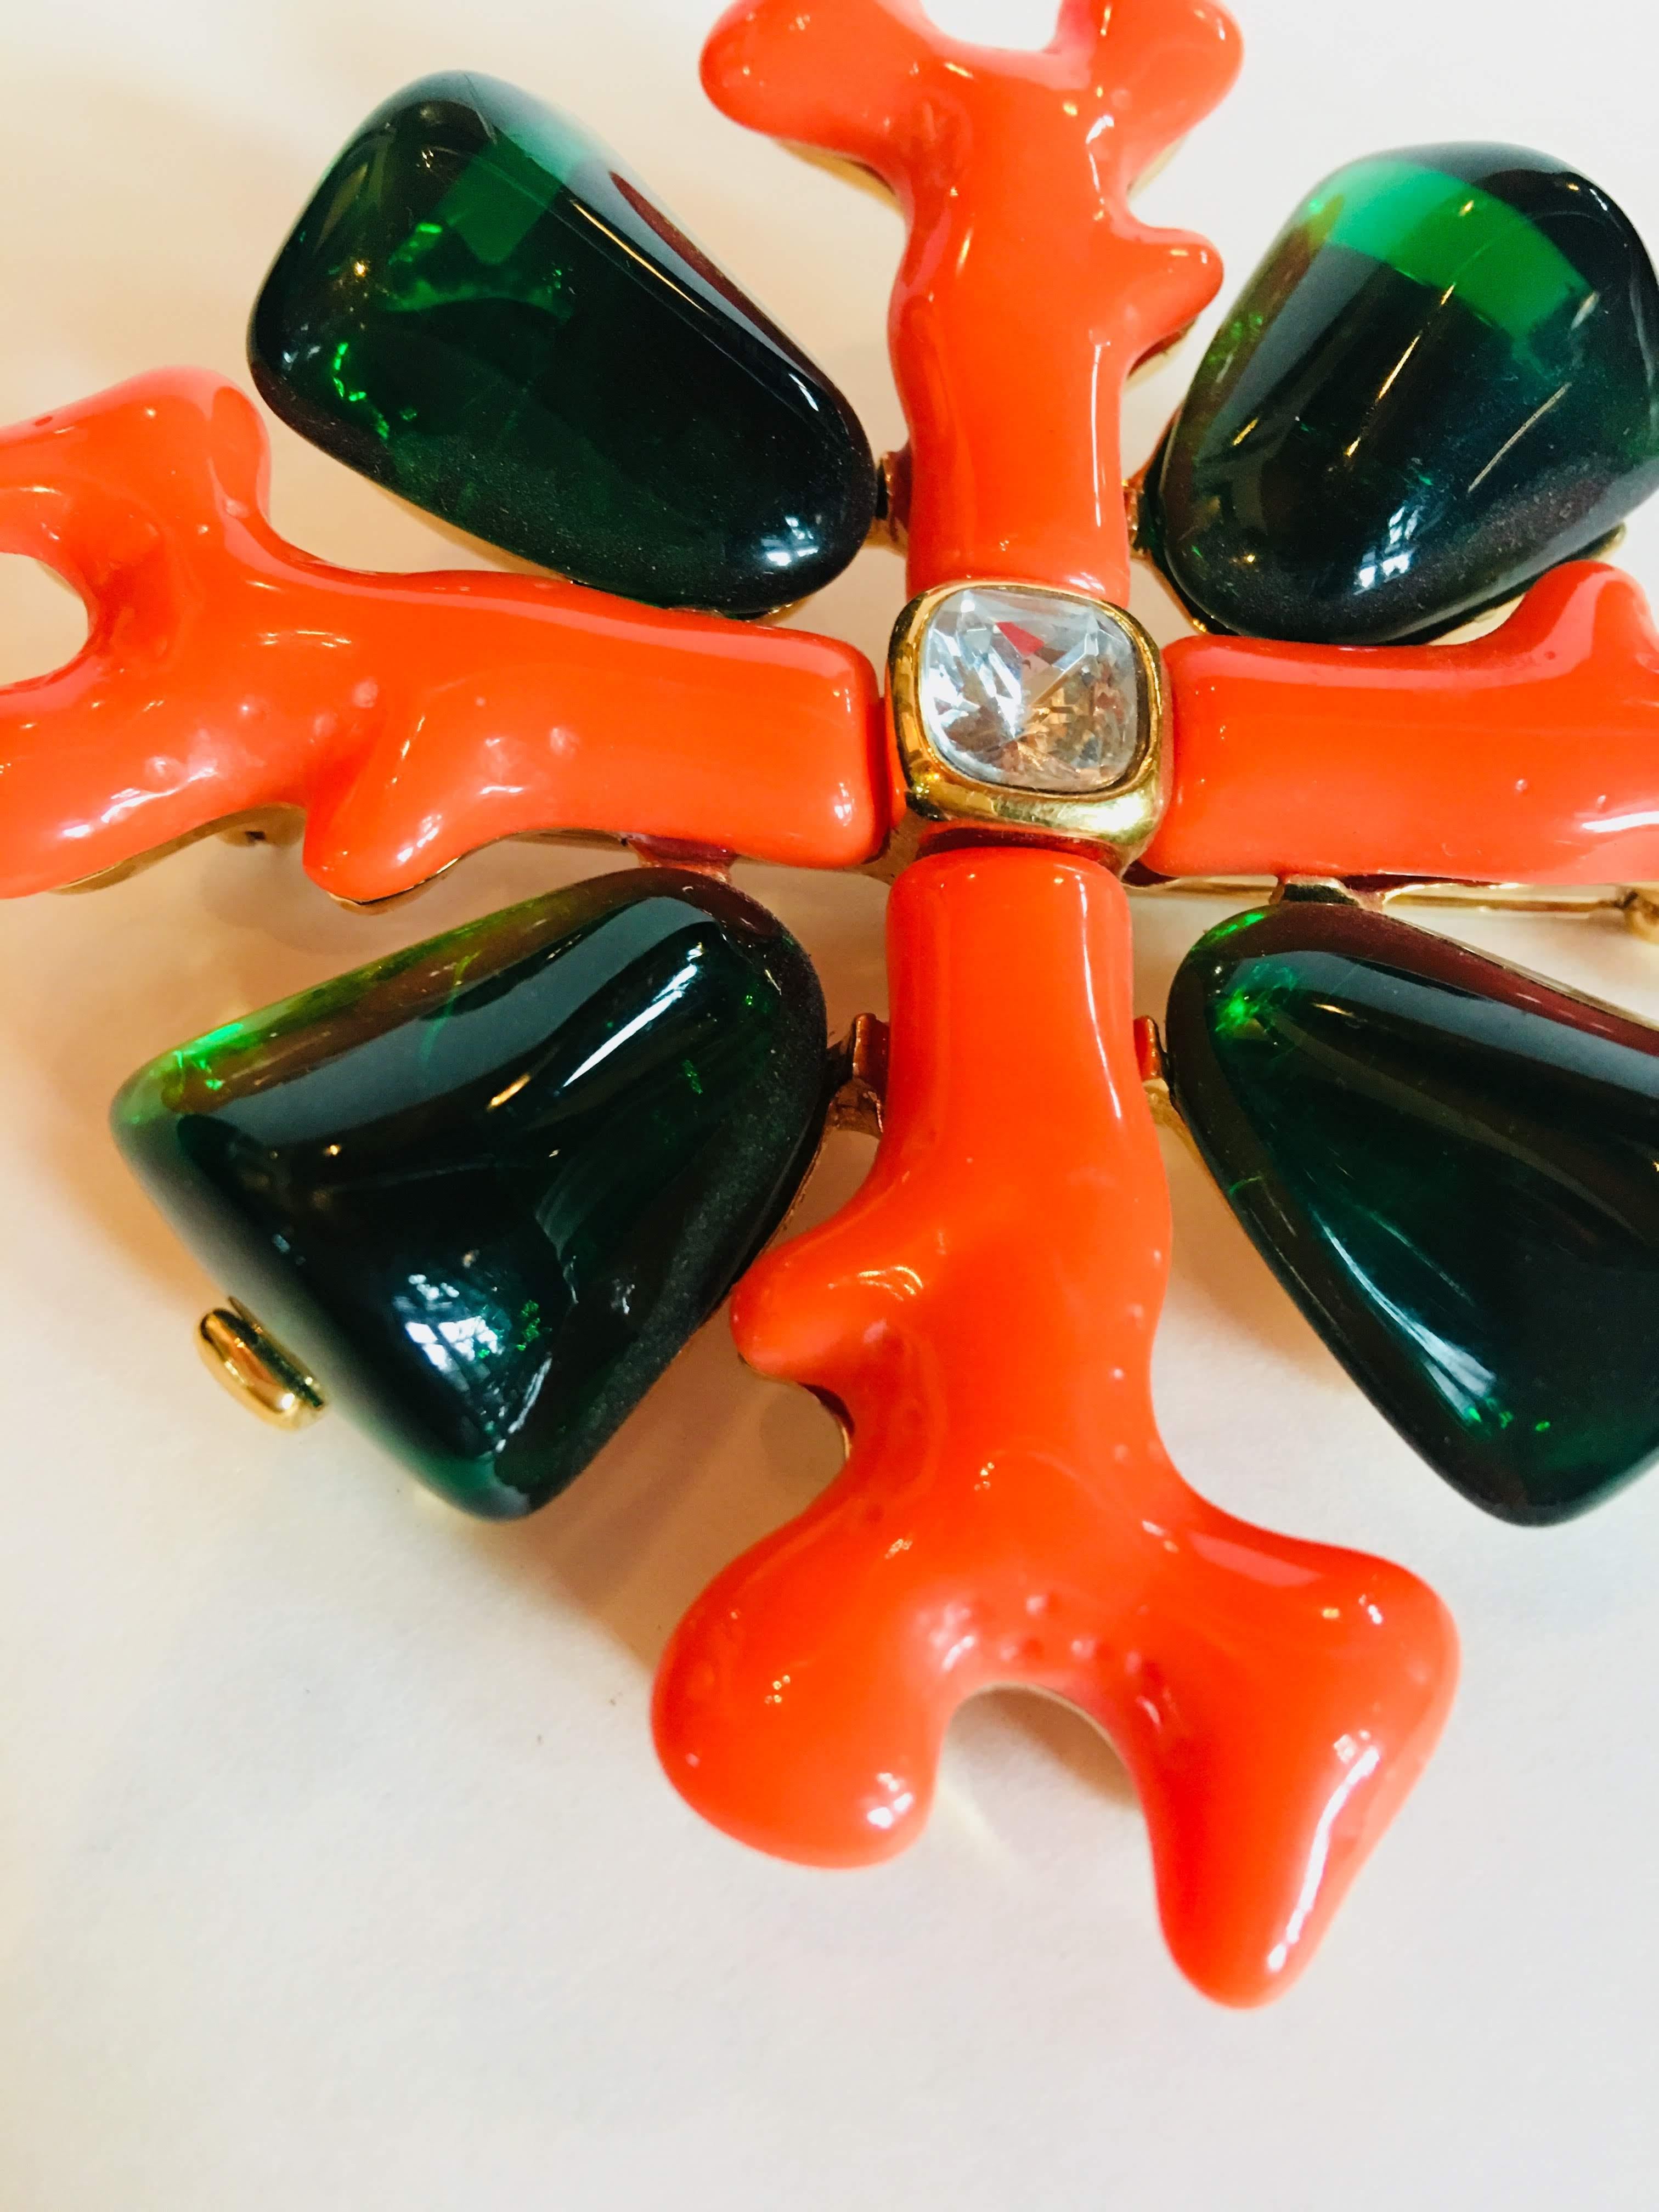 Kenneth Jay Lane Maltese Cross Brooch in Opaque Coral and Translucent Green with Clear Crystal at Center.